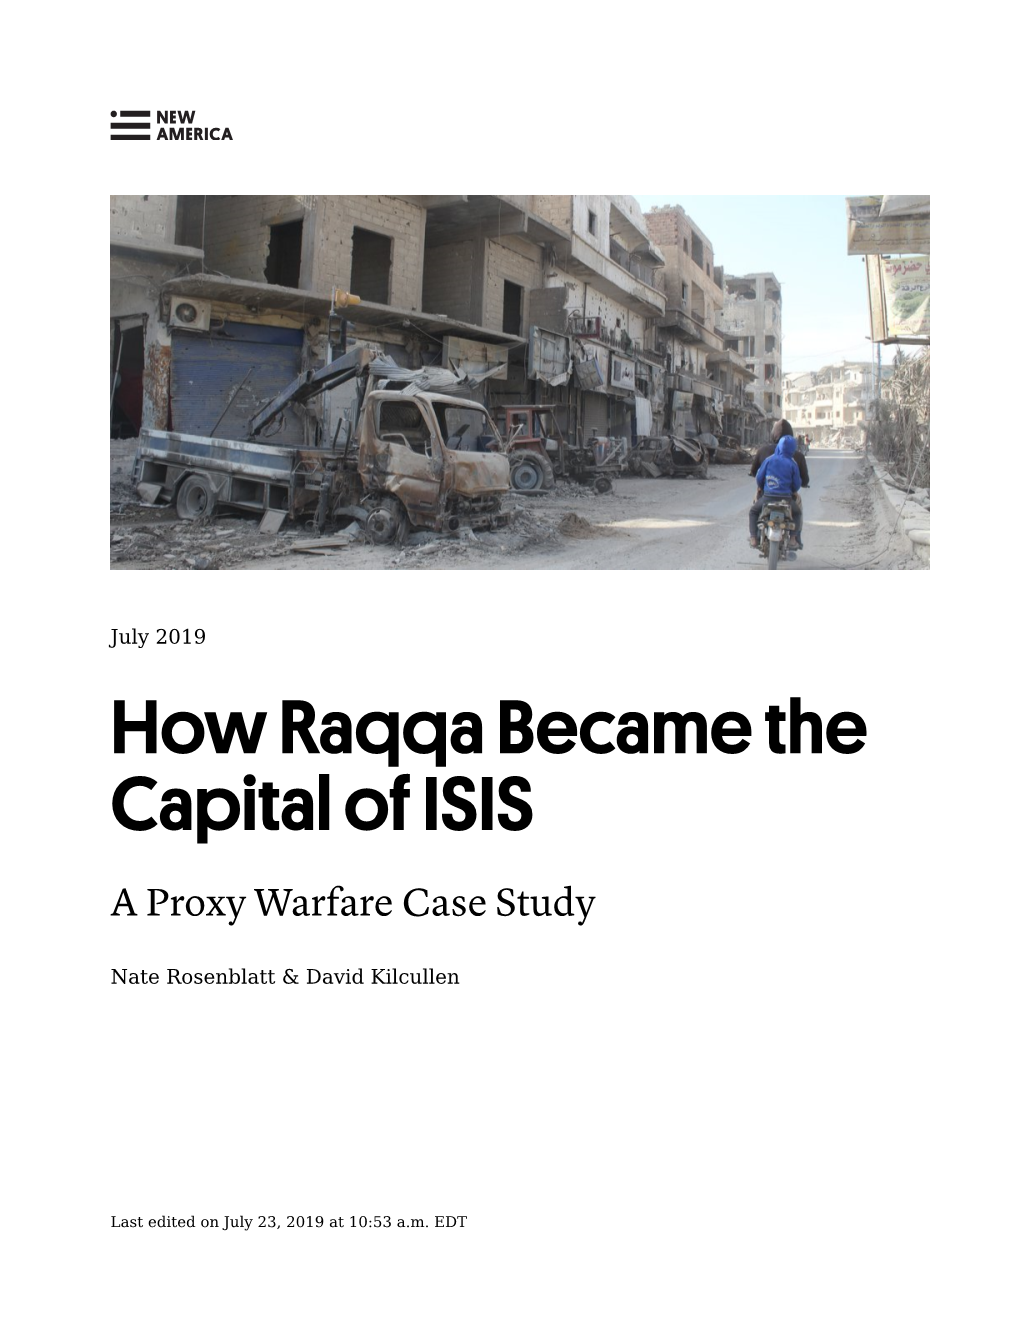 How Raqqa Became the Capital of ISIS